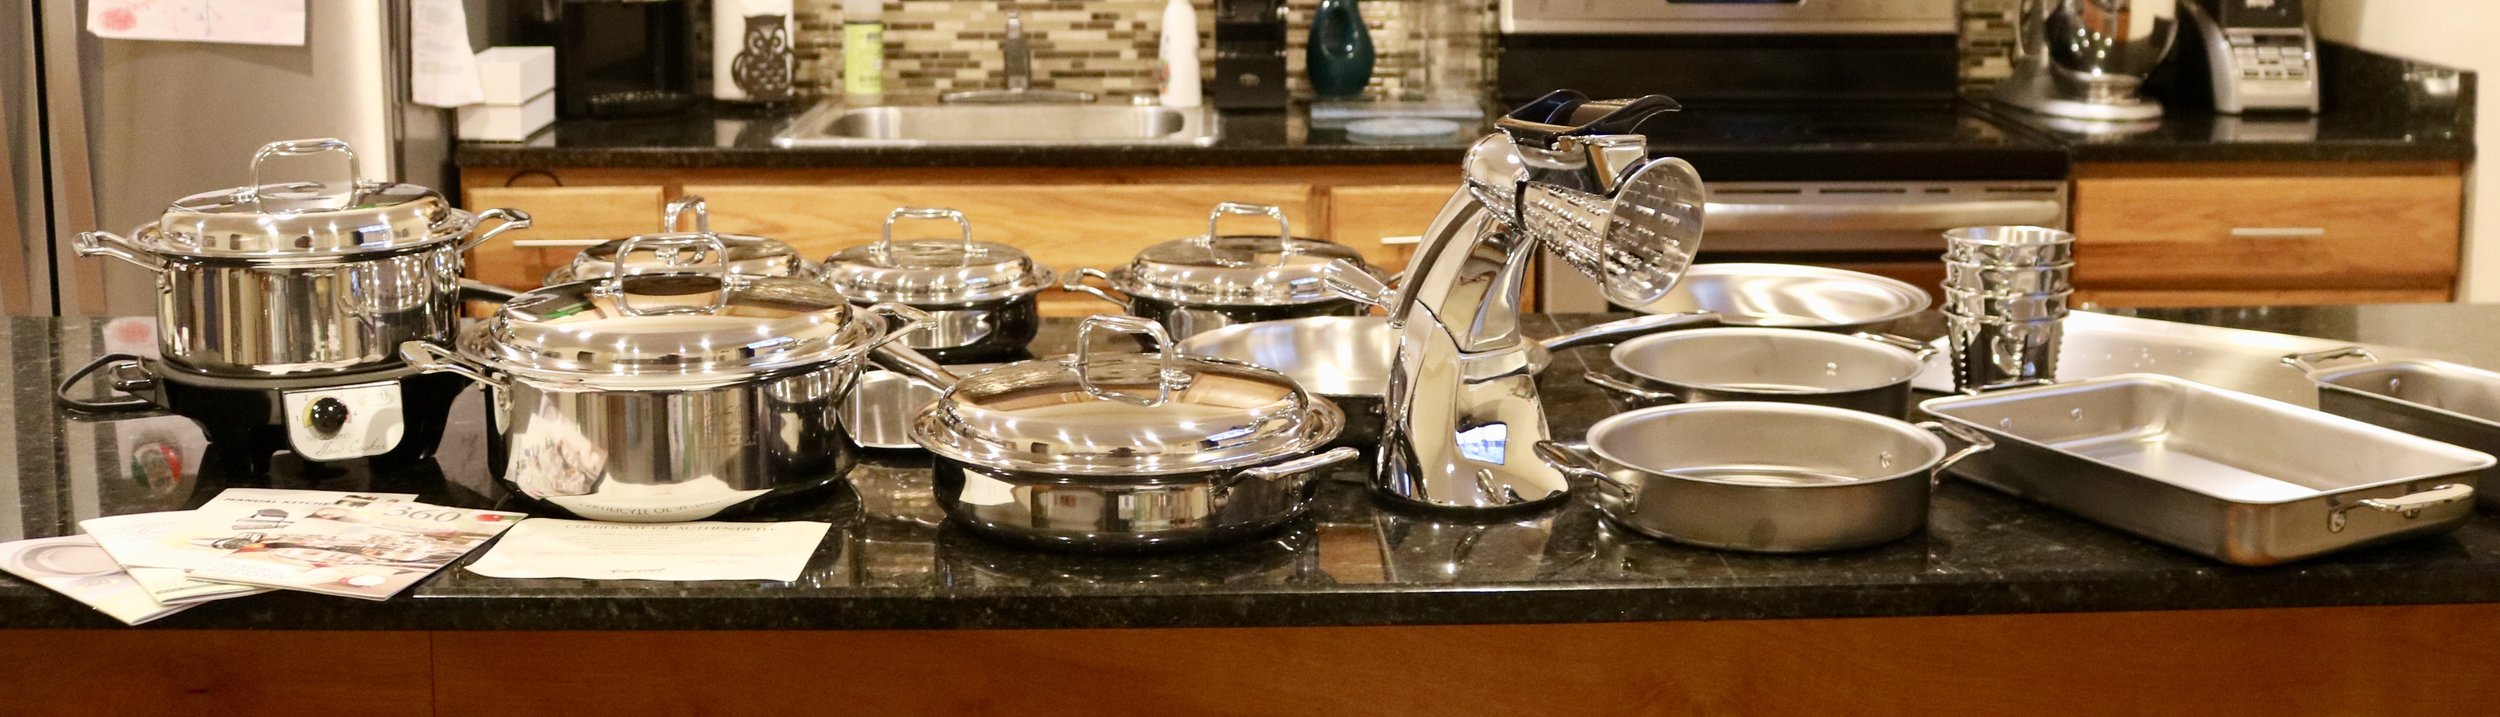 All of the 360 Cookware that is stocked in my kitchen